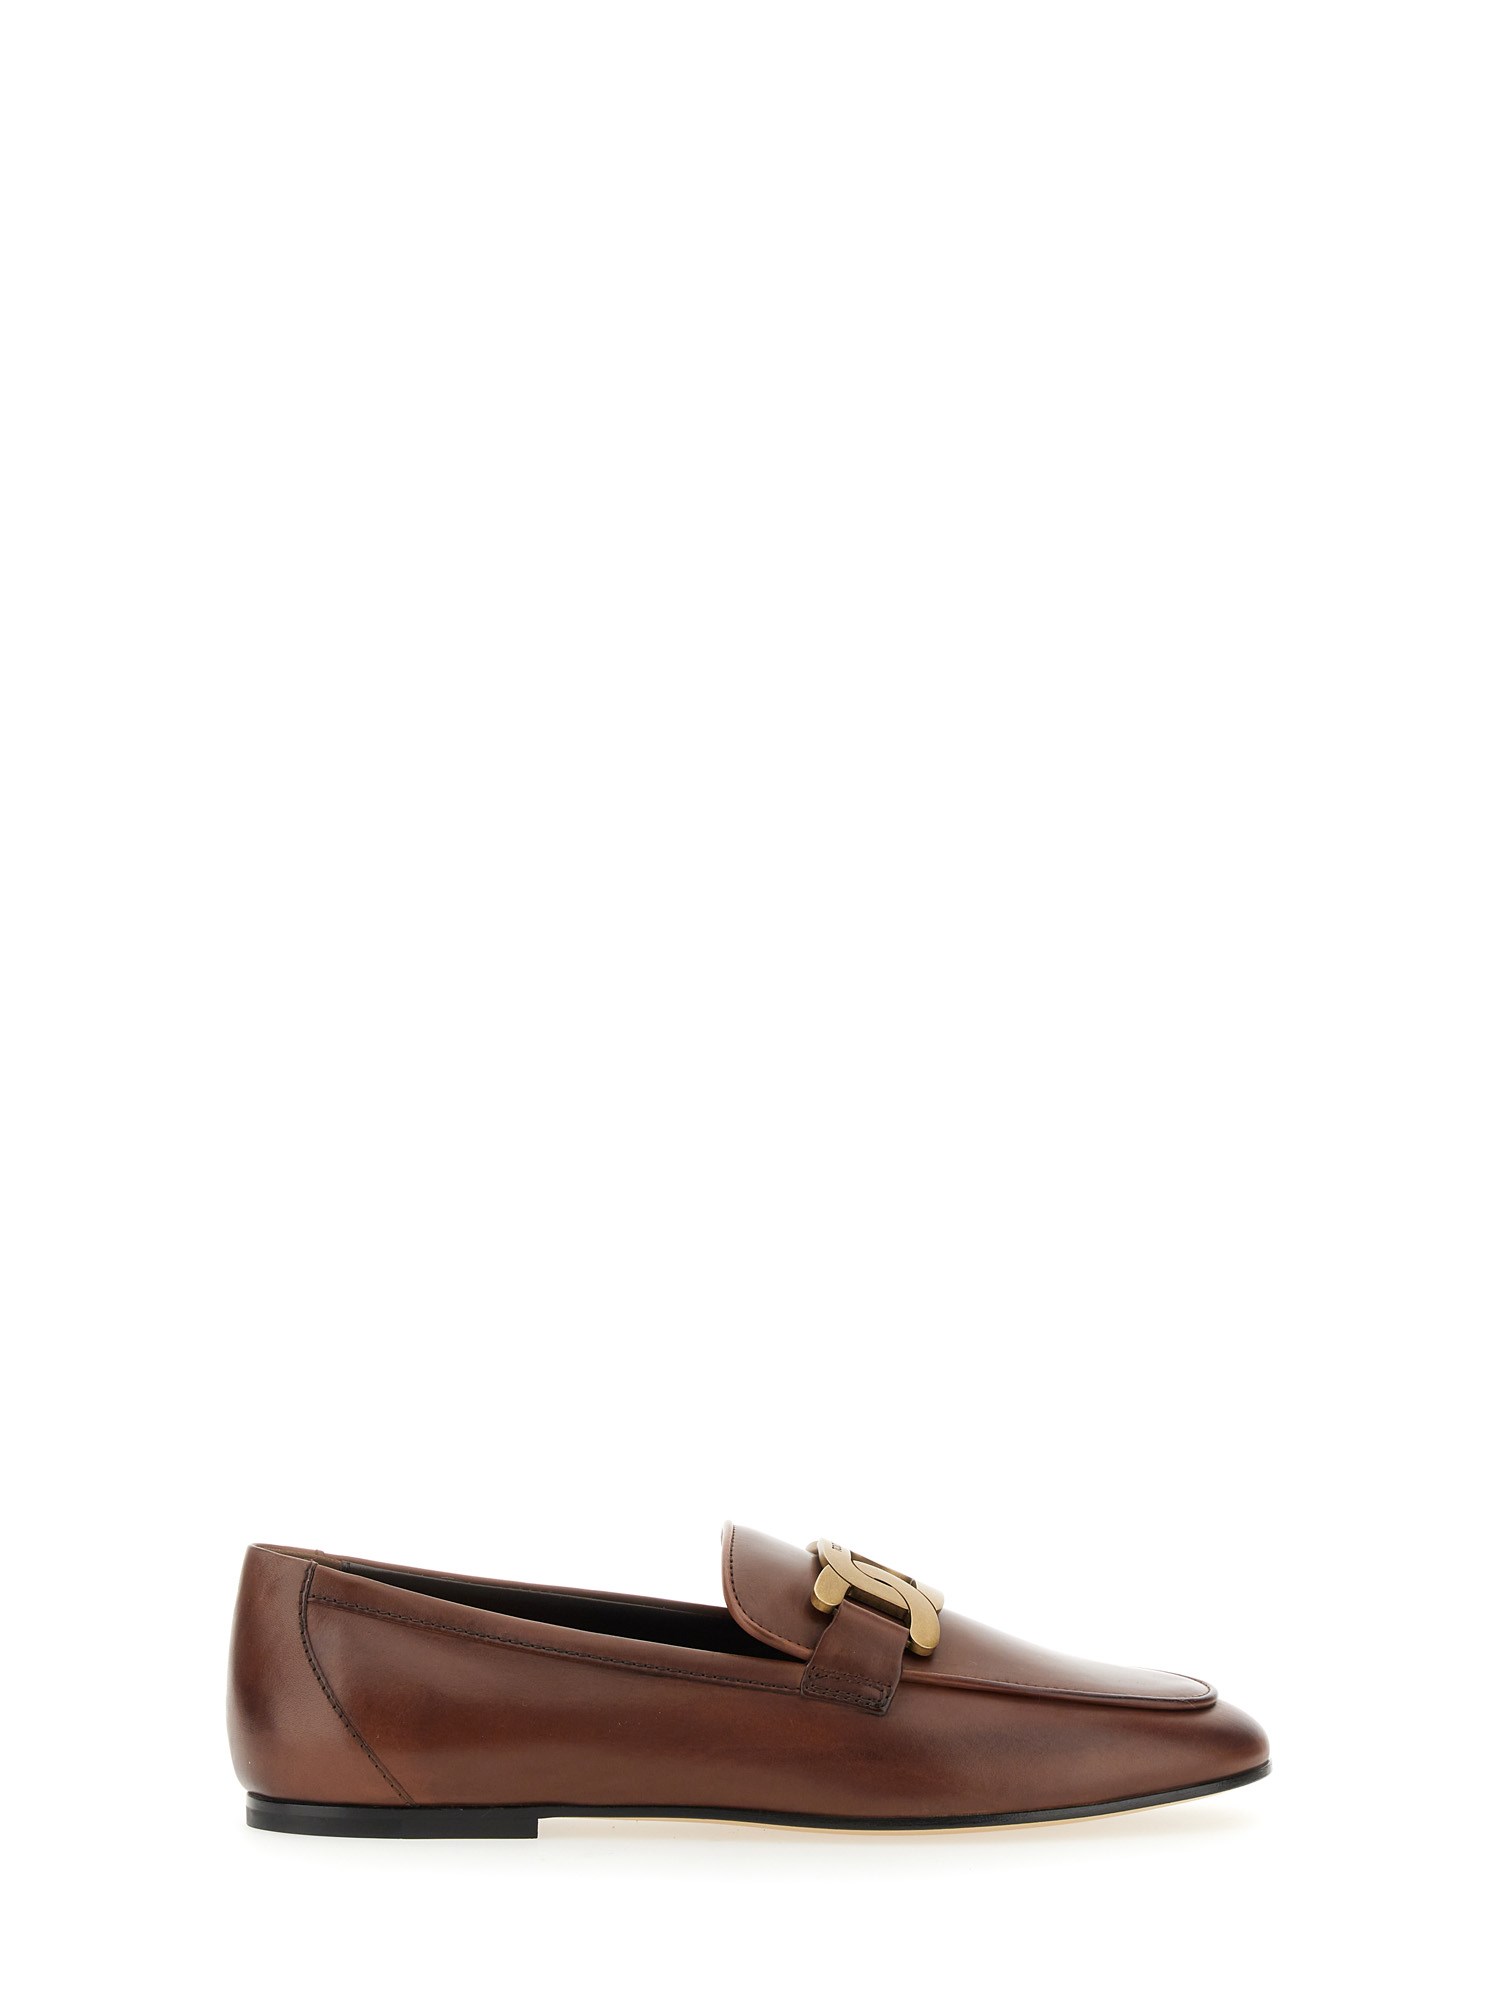 TOD'S MOCCASIN KATE